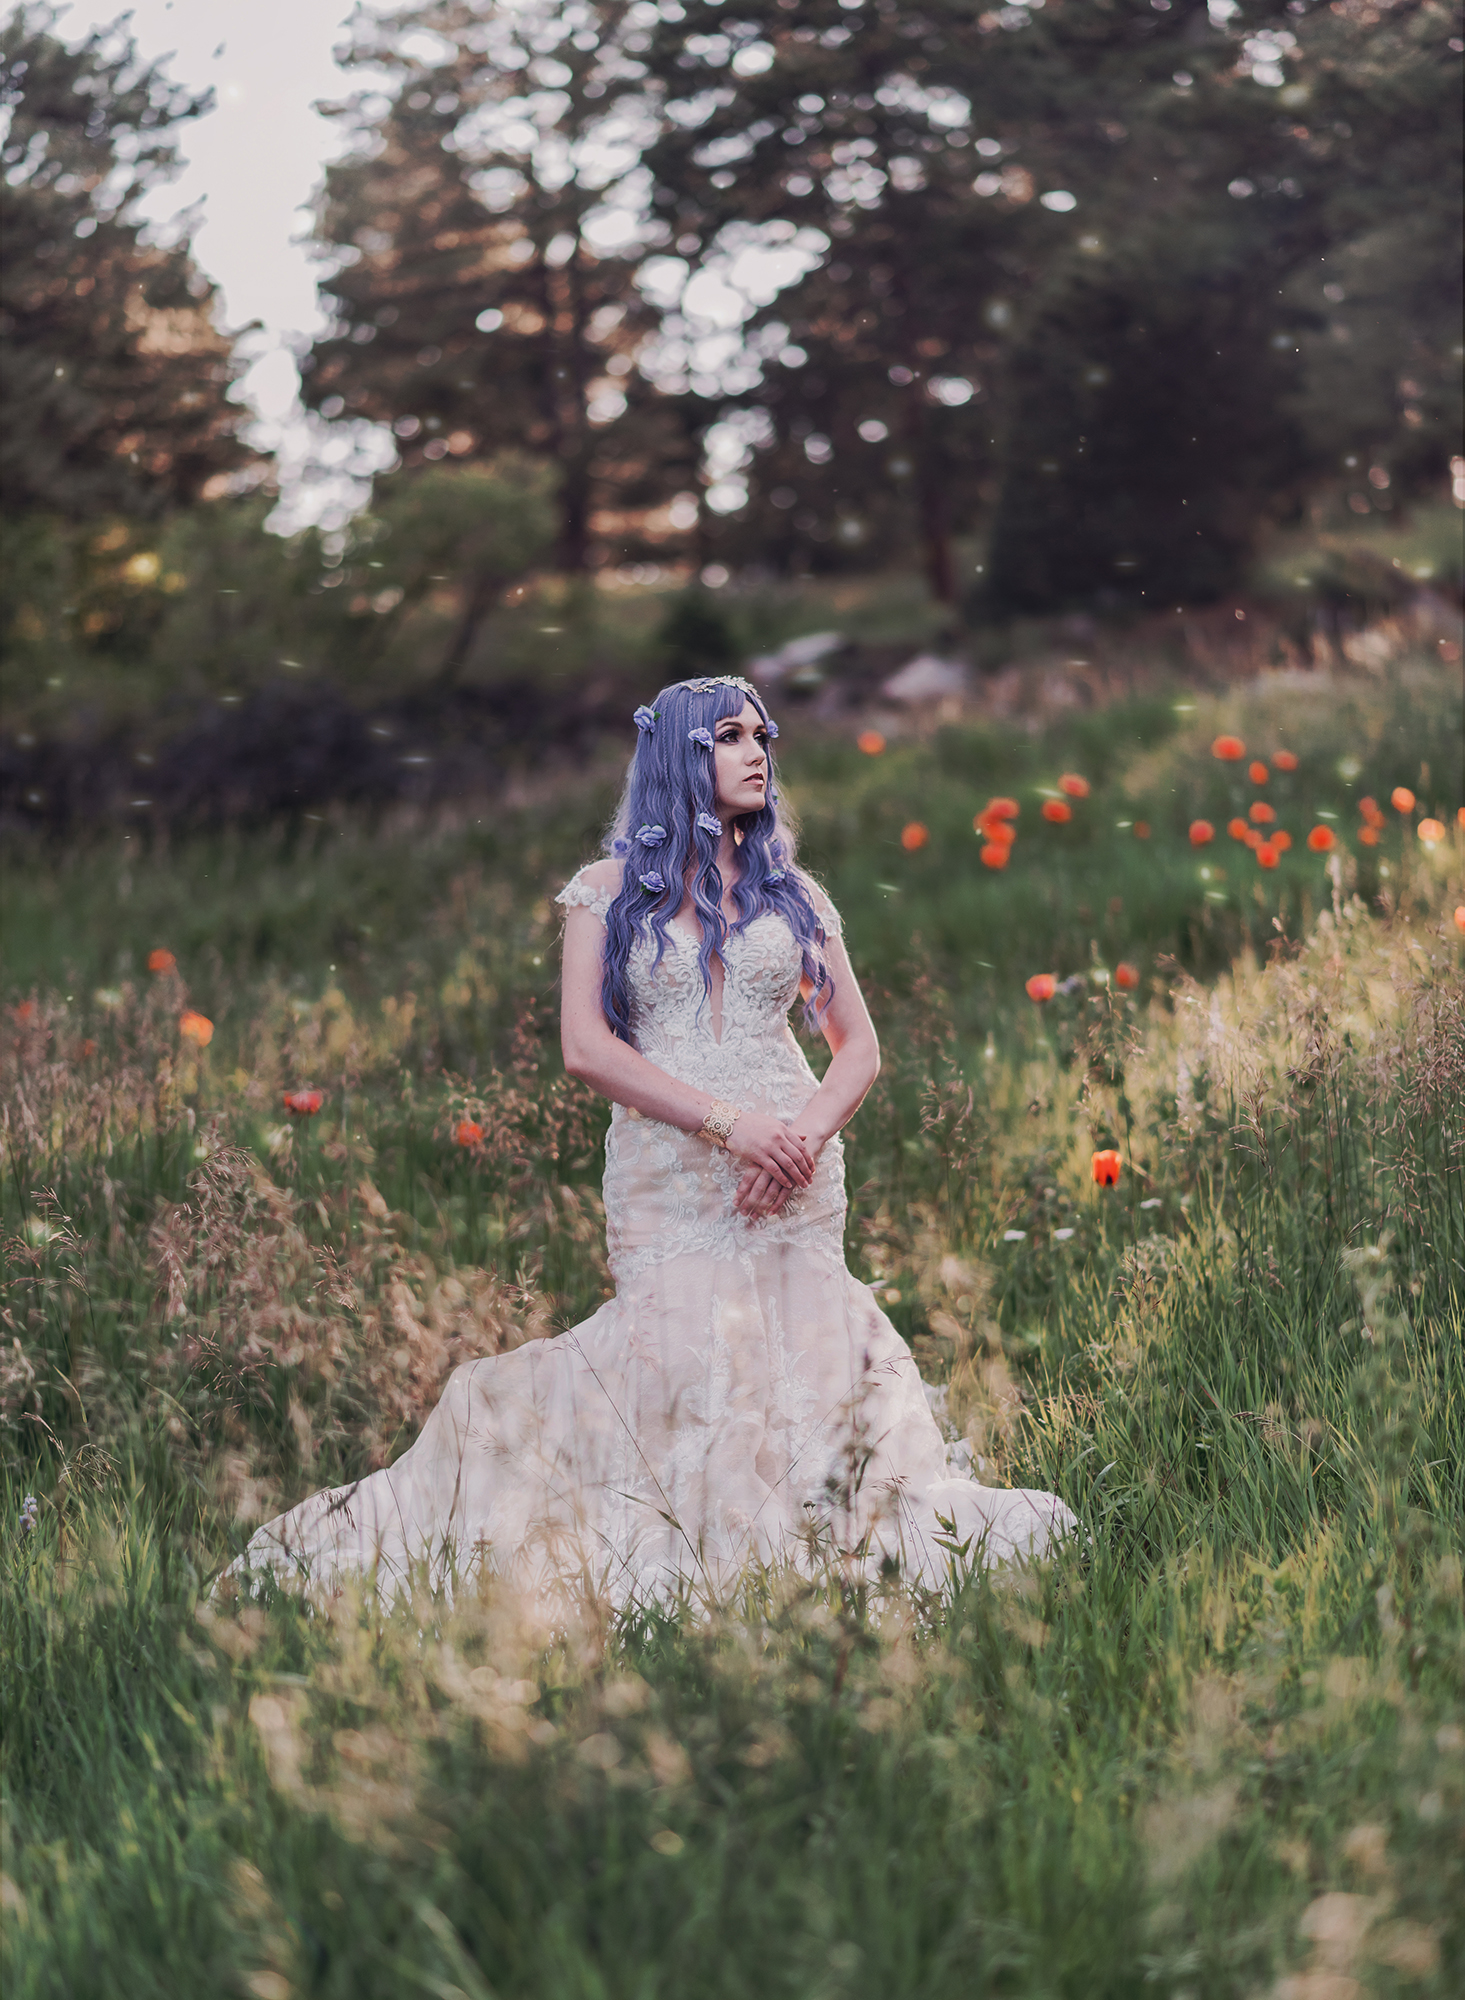 Fantasy bridal portrait of a woman with purple hair and wearing a wedding dress in a field of wildflowers in a woodland area in Boulder Colorado by Kendra Colleen Photography.